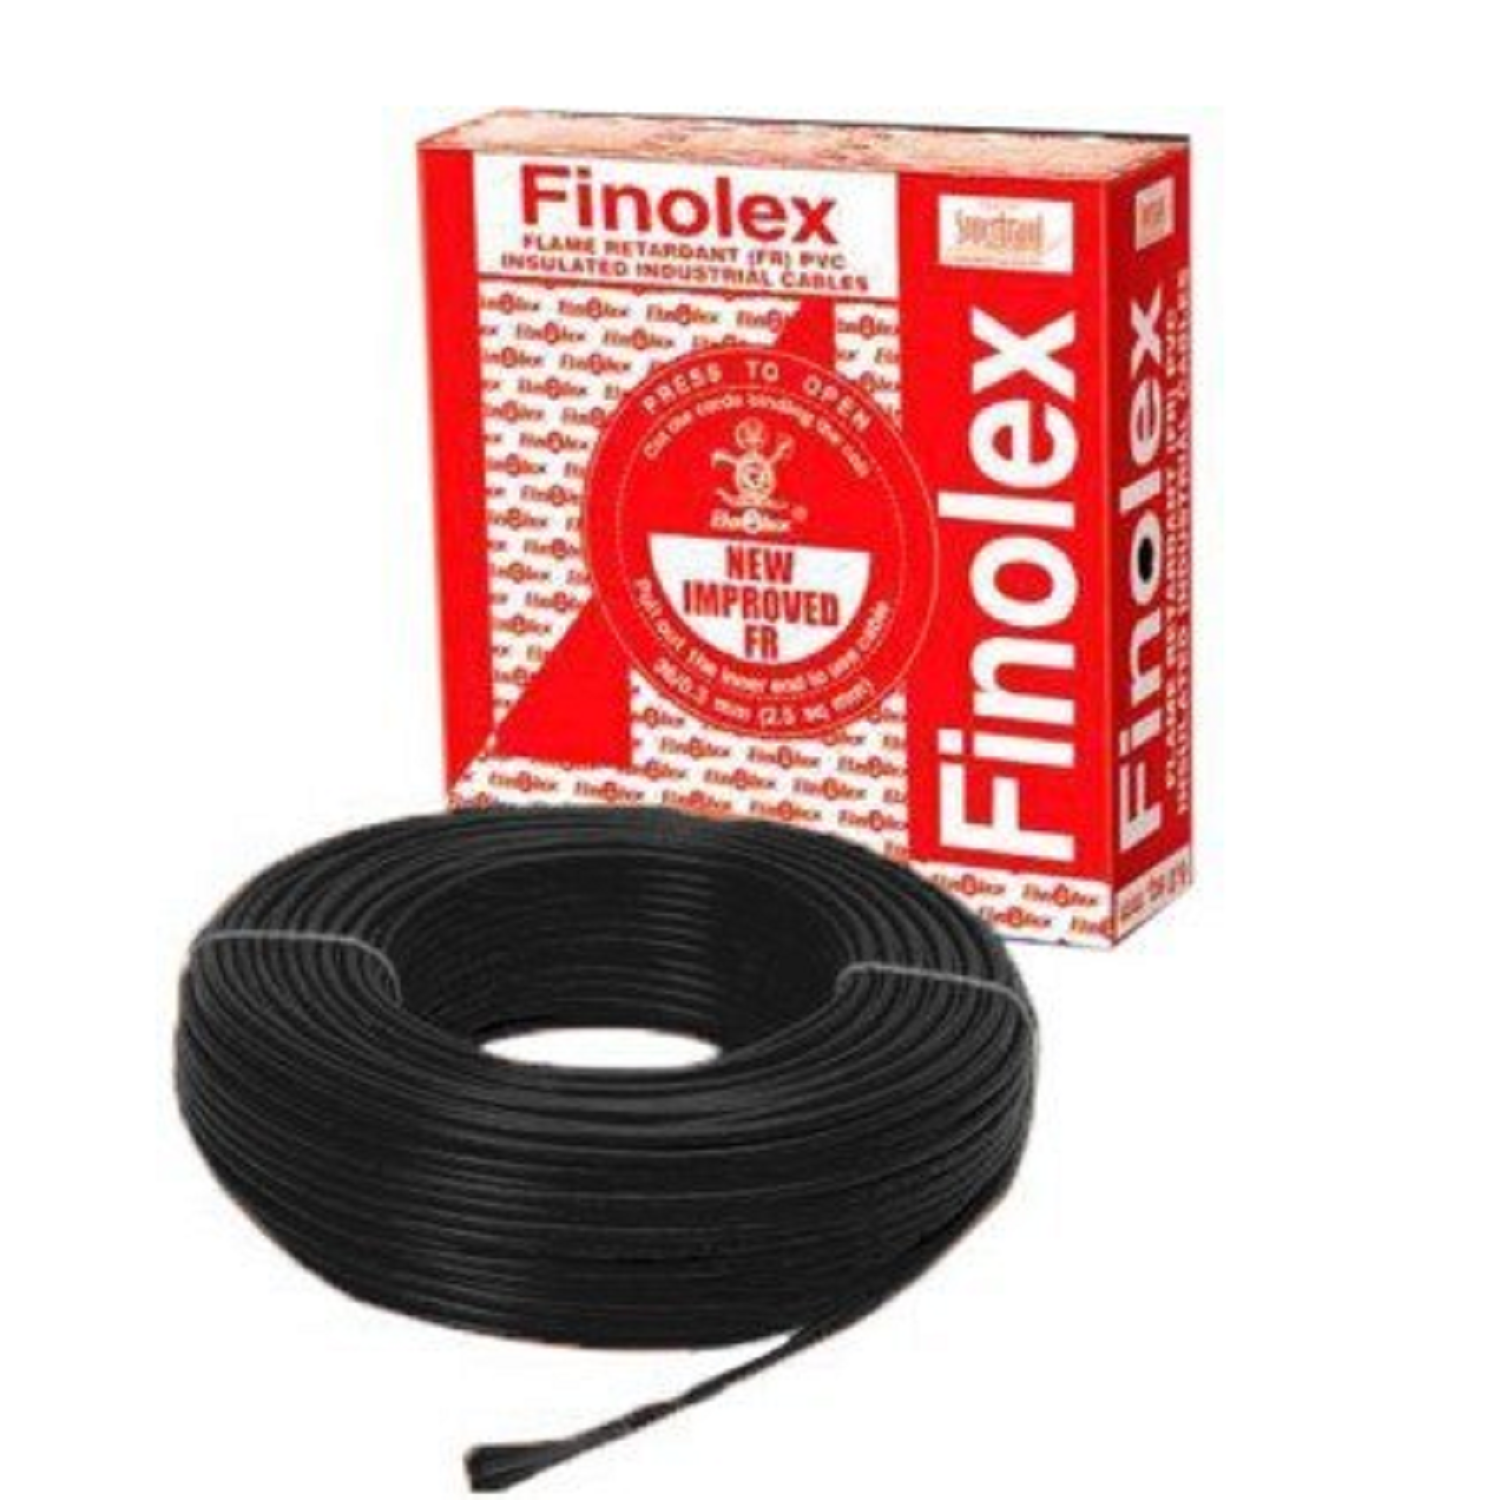 6.0 Sqmm Finolex FR Single Core Copper Wire (90 Mtr) With PVC Insulated for House & Industrial Uses